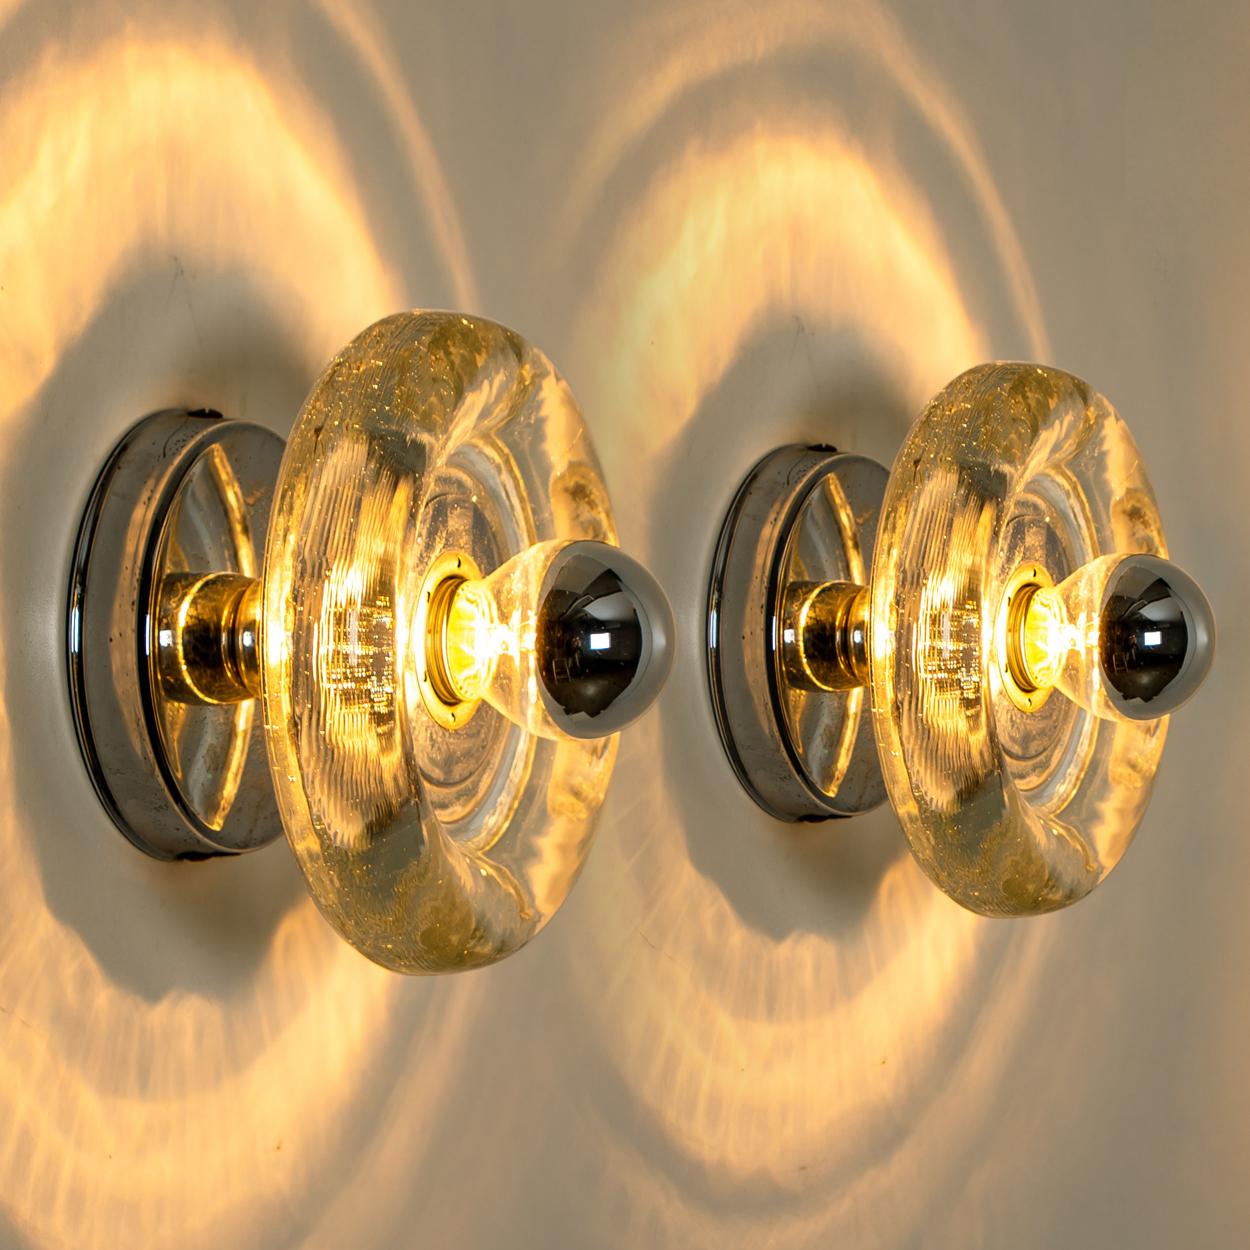 One of the 4 Doria lights are made from thick hand blown glass on a round silver colored back plate. The glass causes a nice lighting effect on the ceiling or wall. Each lamp has one E14 fitting (Max 30 Watt)

Can work for impressive wall or